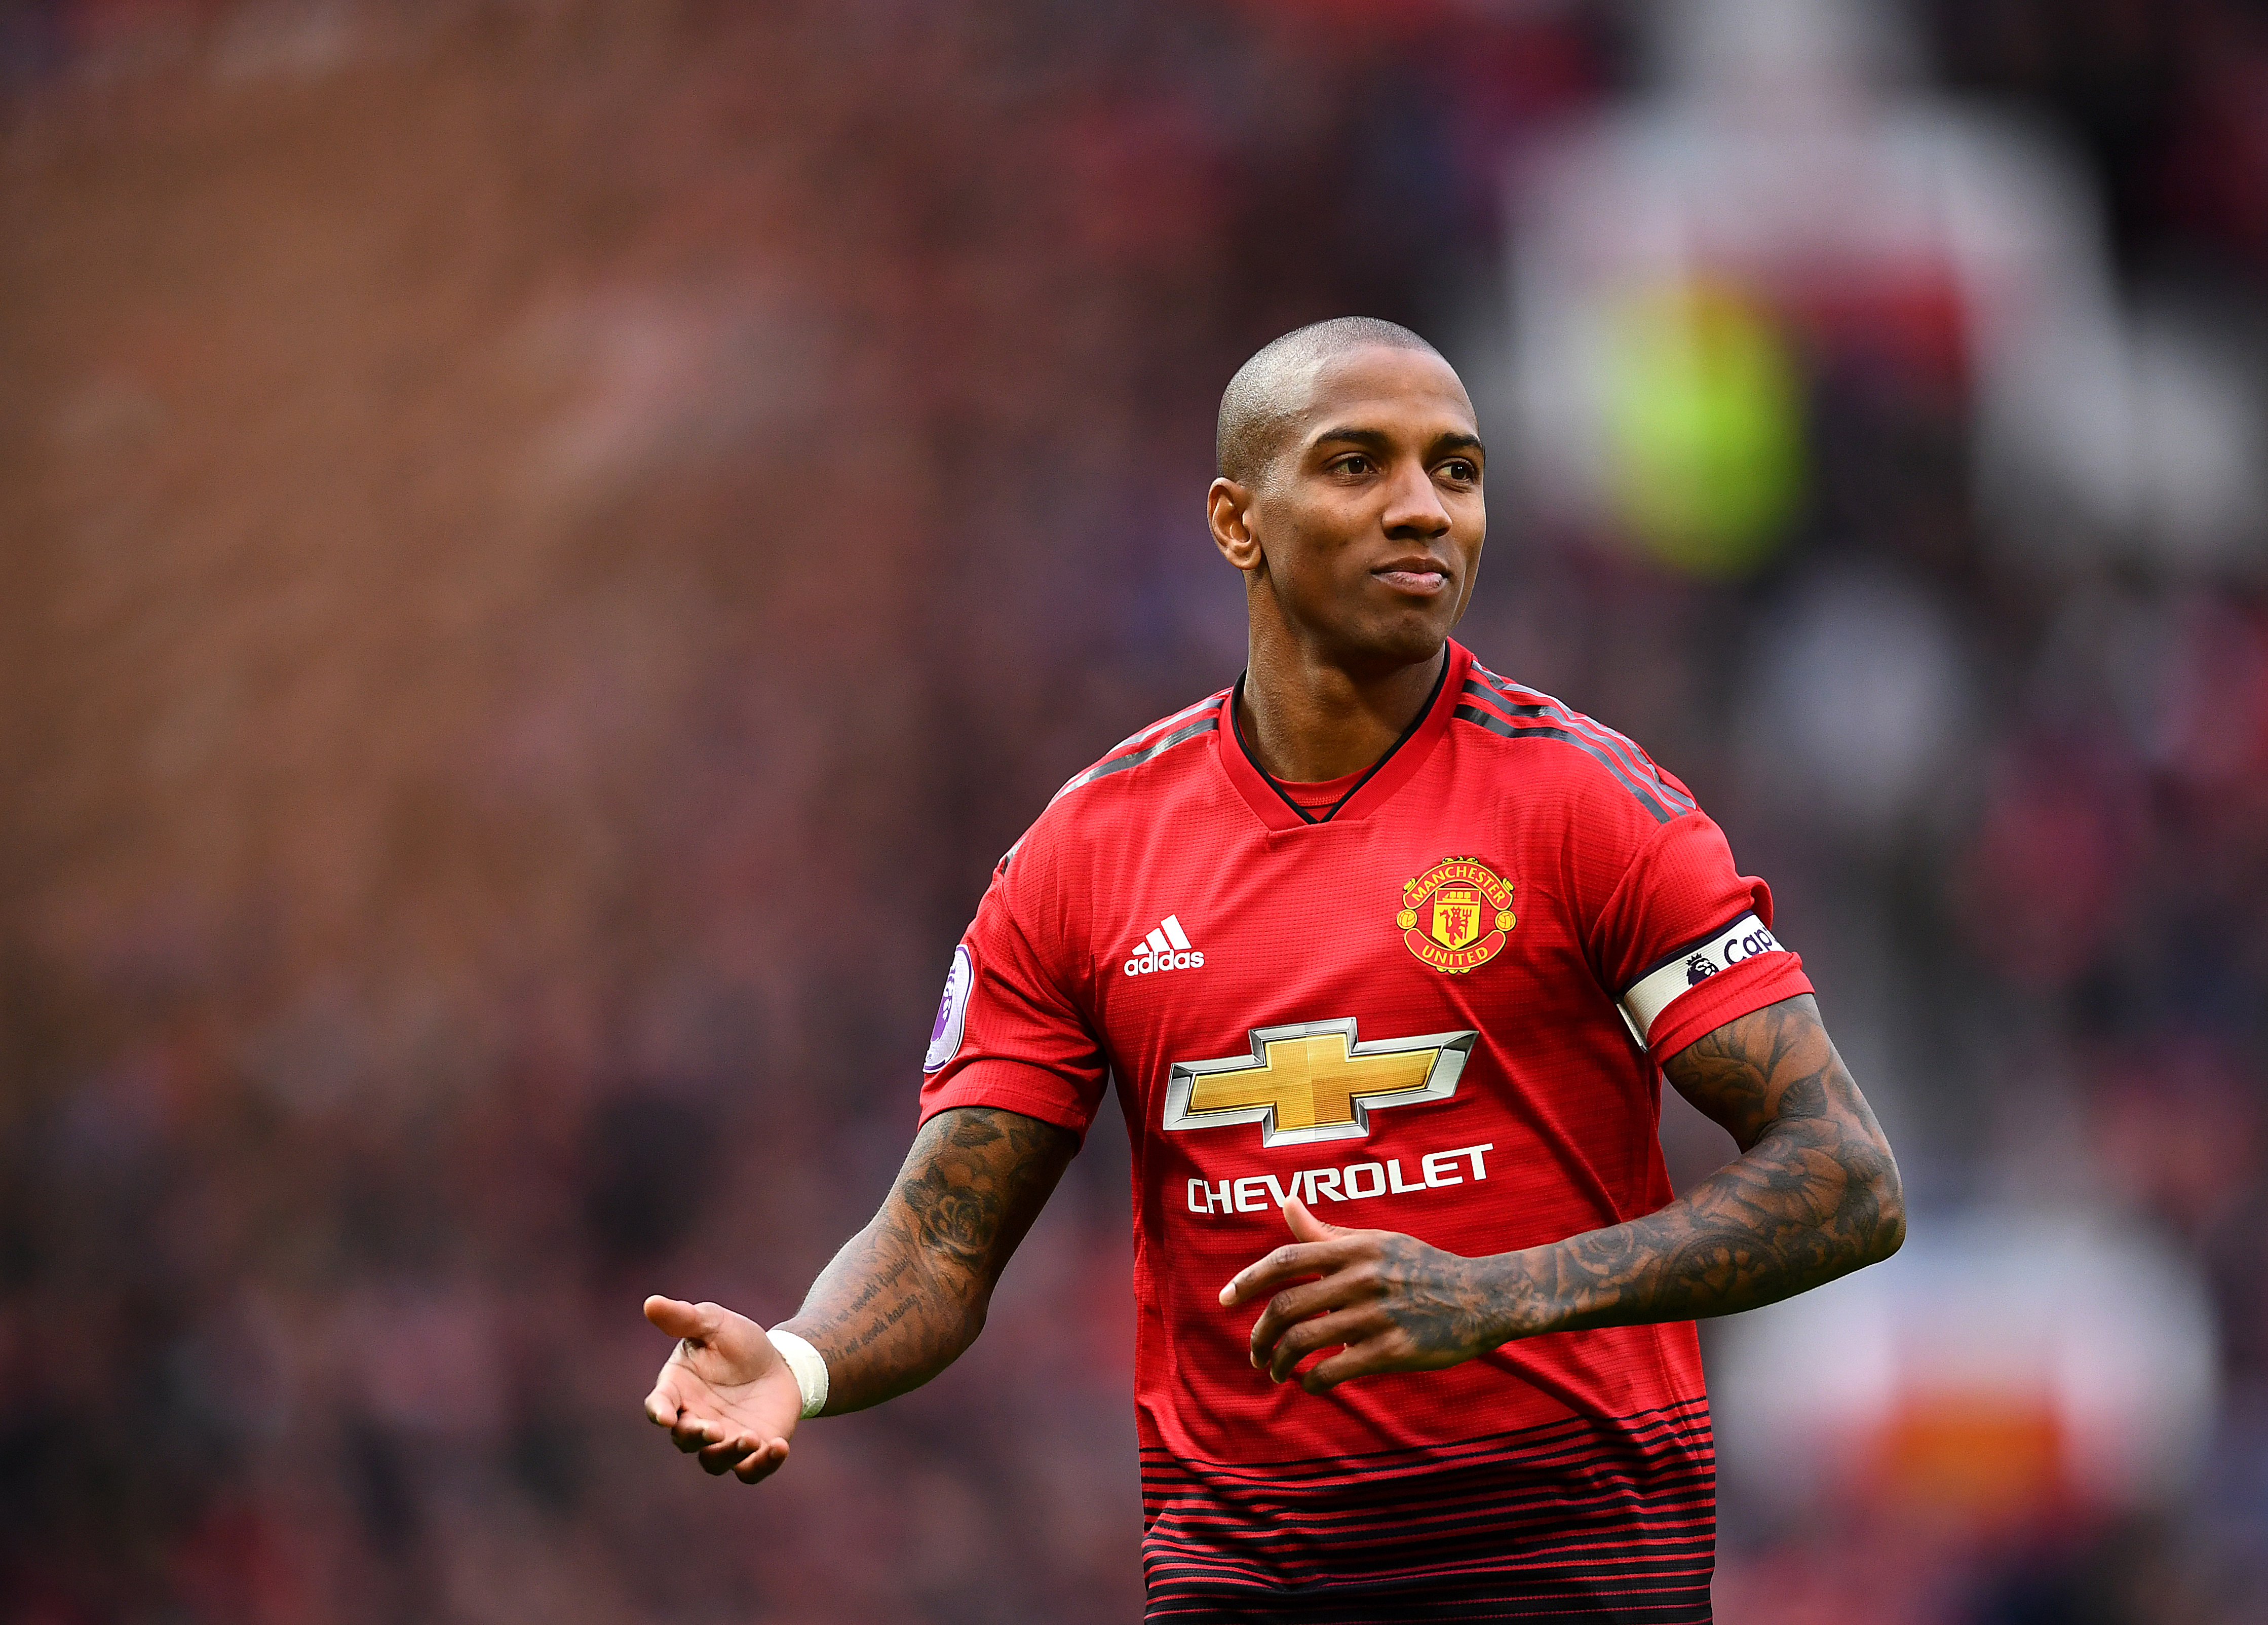 MANCHESTER, ENGLAND - MARCH 02: Ashley Young of Manchester United in action during the Premier League match between Manchester United and Southampton FC at Old Trafford on March 02, 2019 in Manchester, United Kingdom. (Photo by Clive Mason/Getty Images)